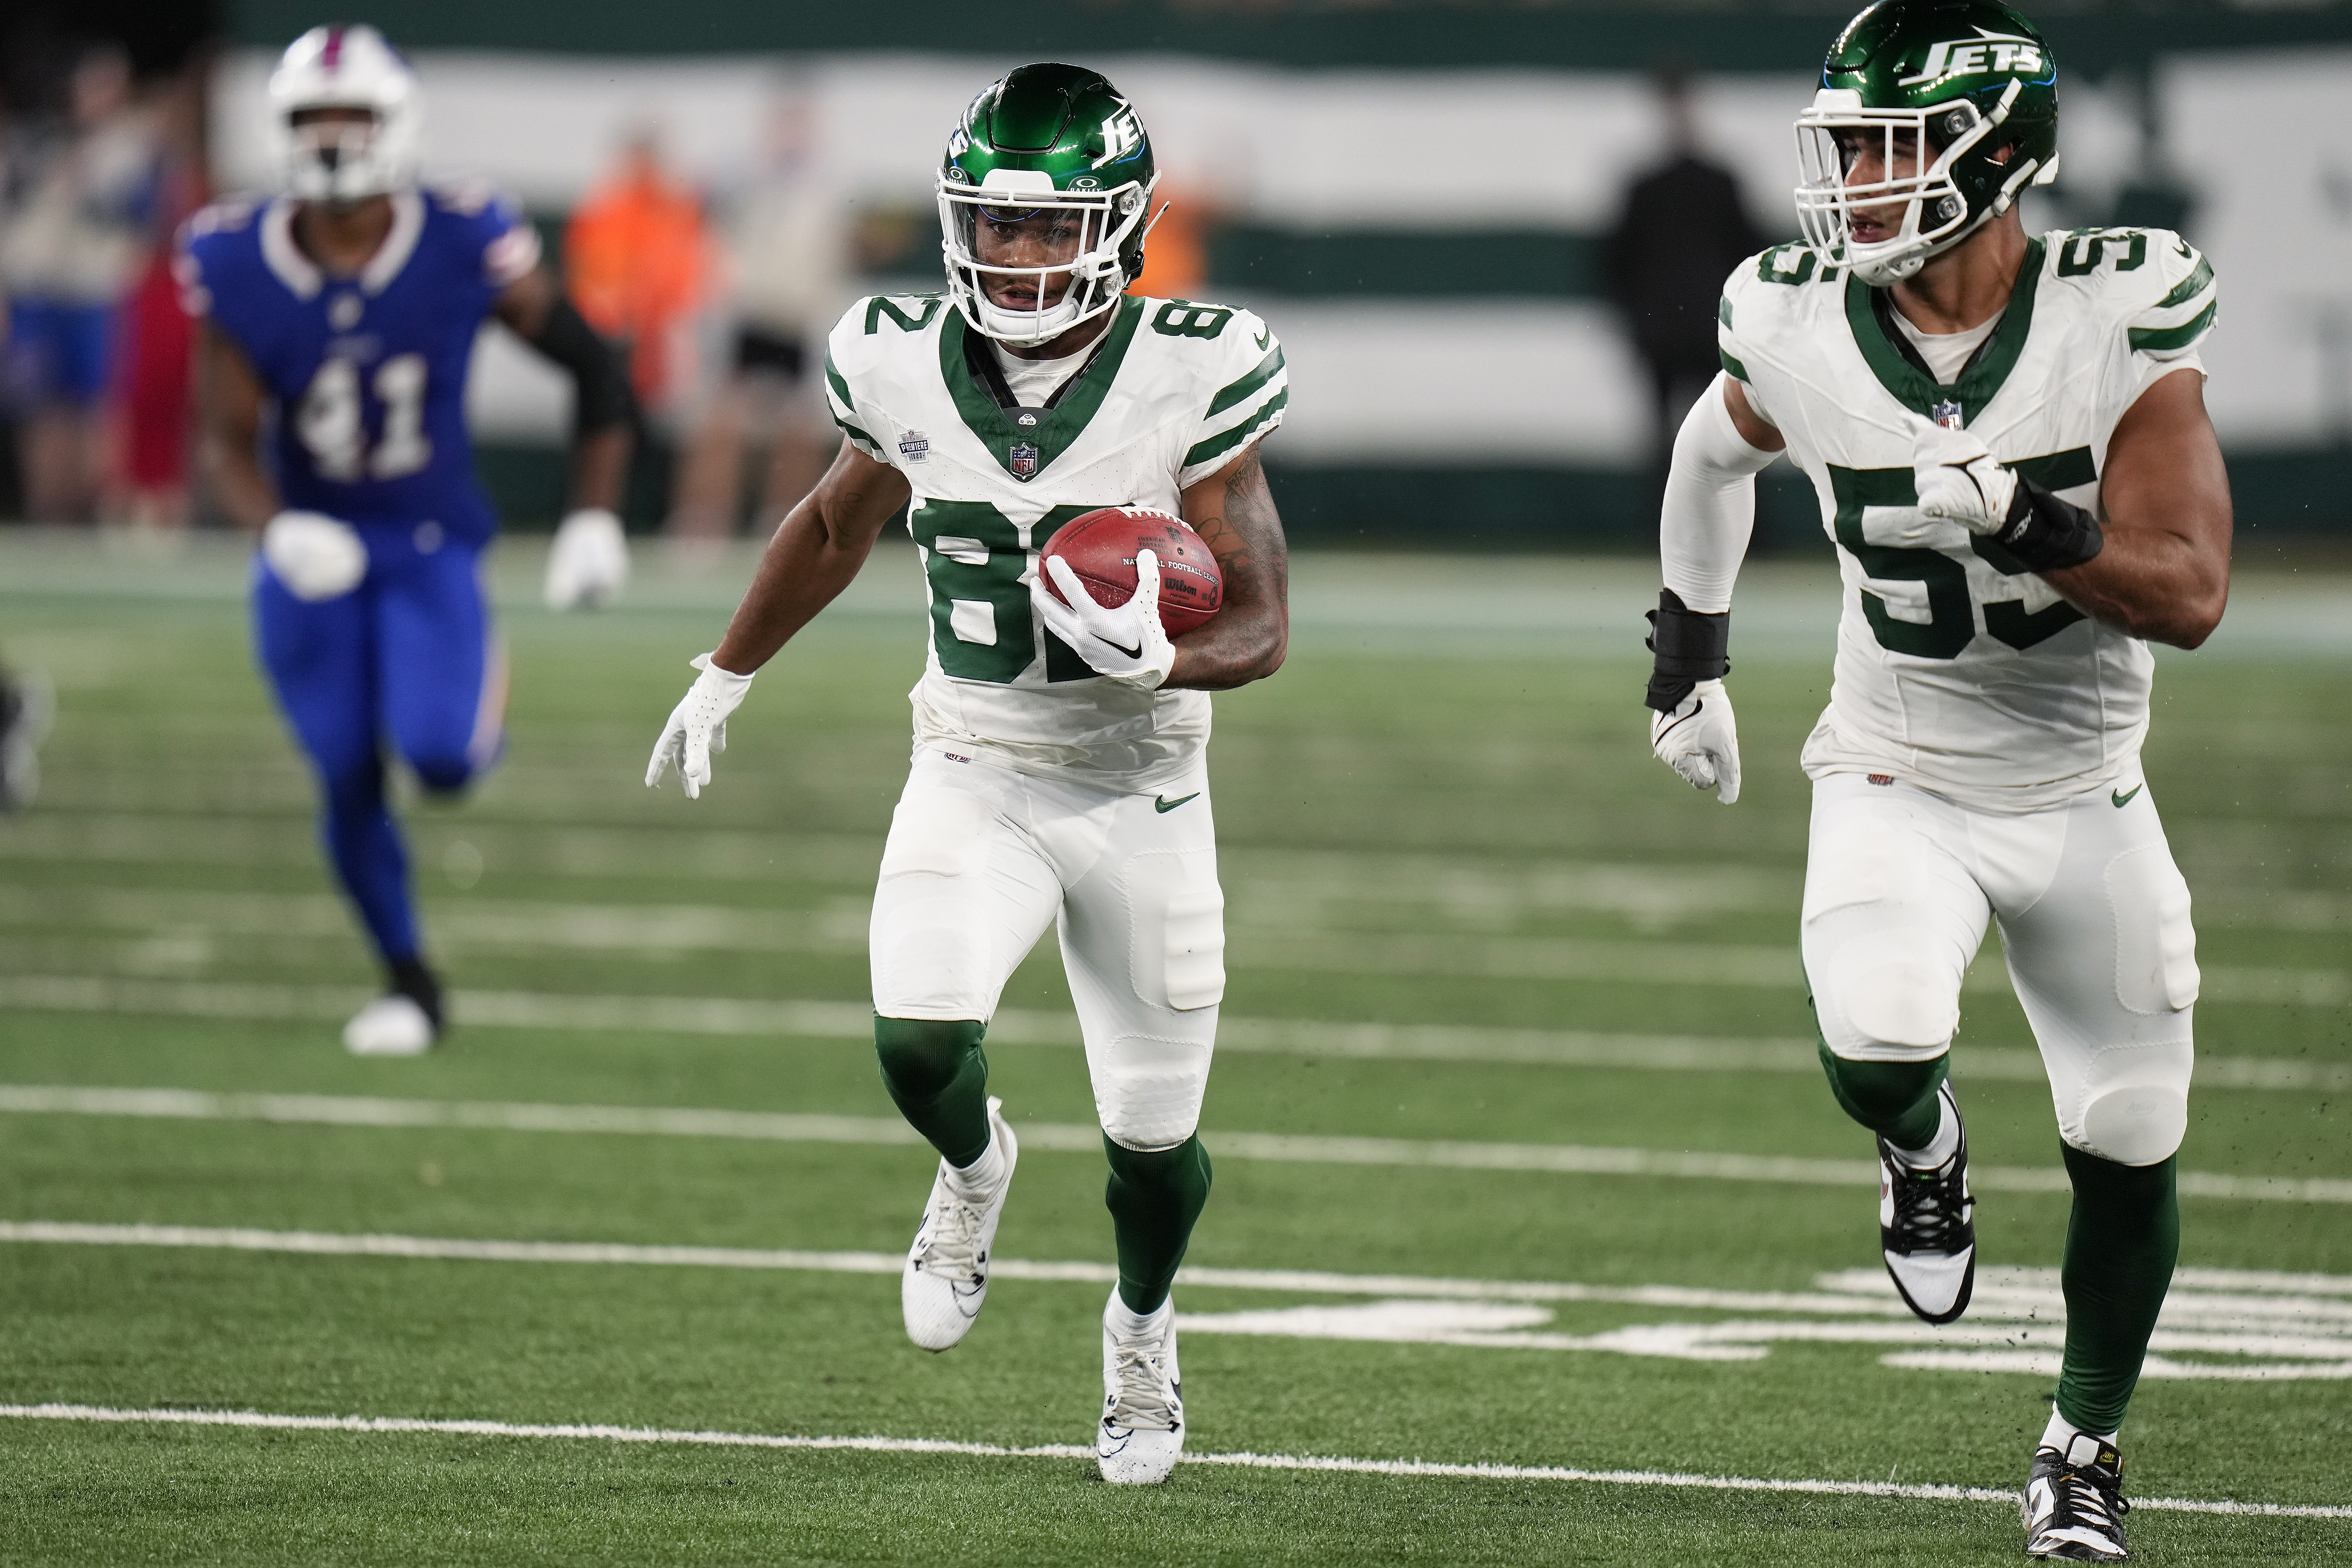 Jets 22, Bills 16 in OT  Game recap, highlights + stats to know